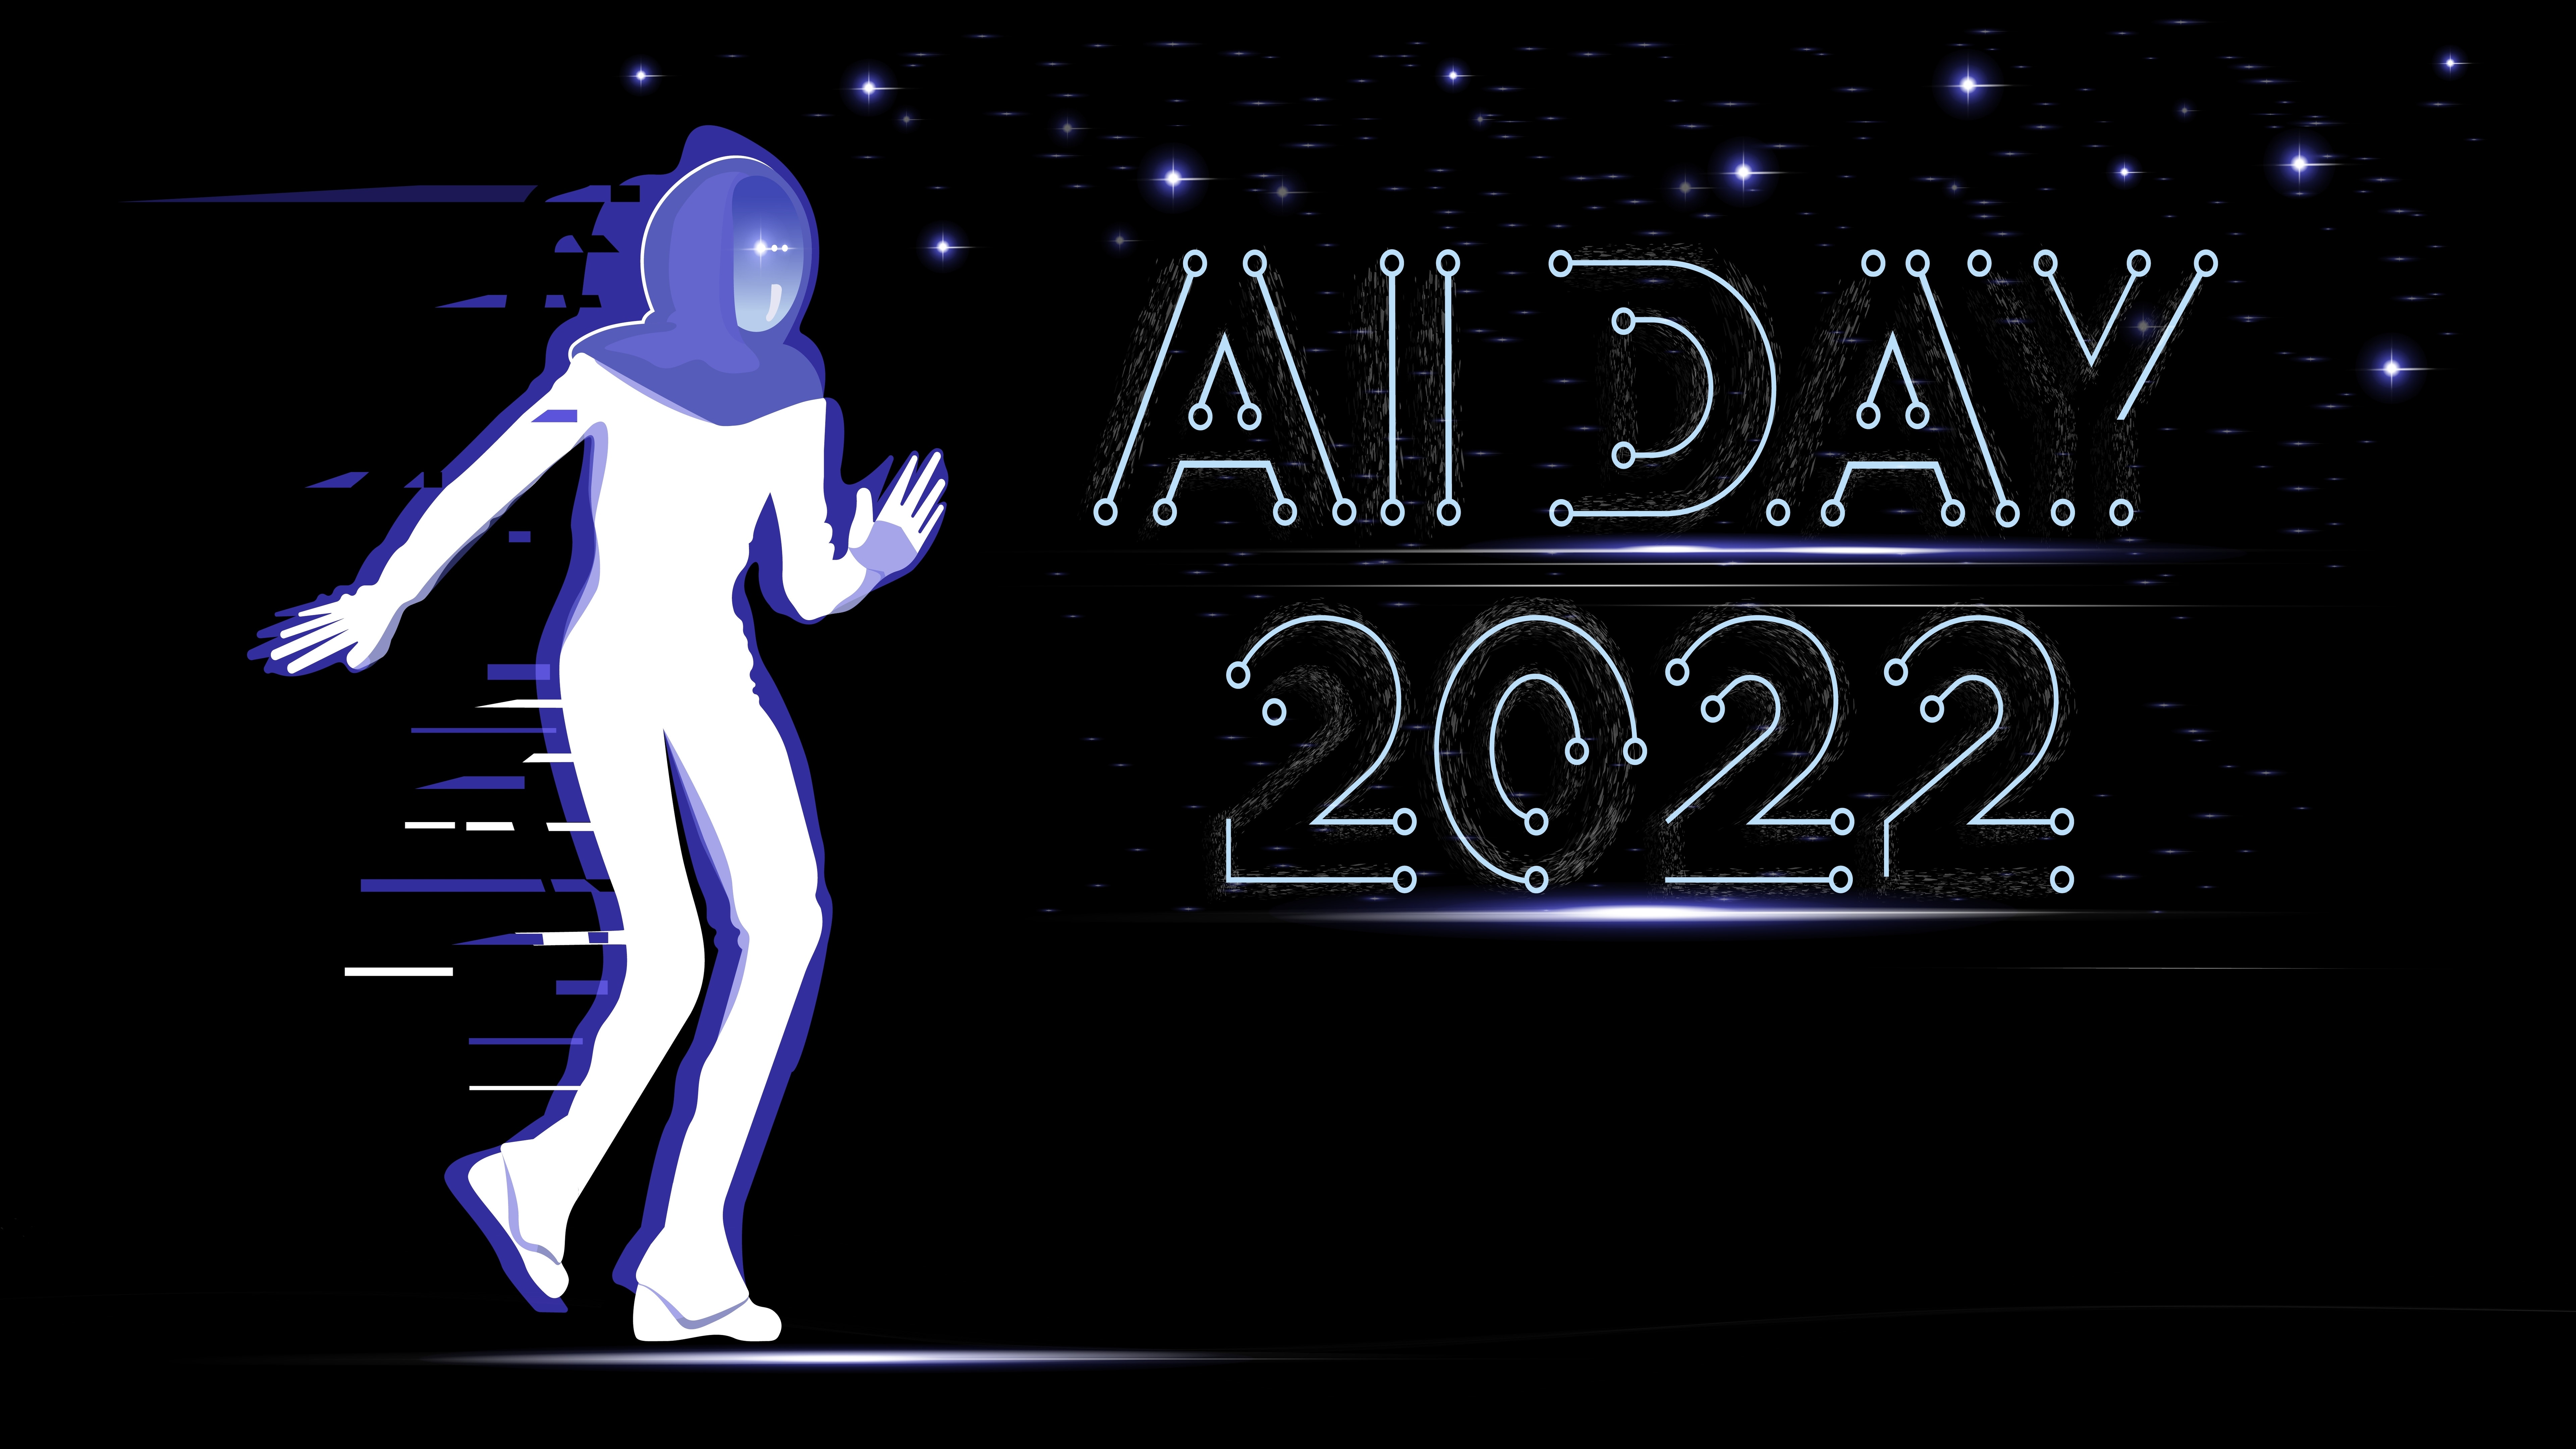 Tesla AI Day 2022 Is Here: Updates On Optimus, Dojo, FSD And What Else To Expect Tonight